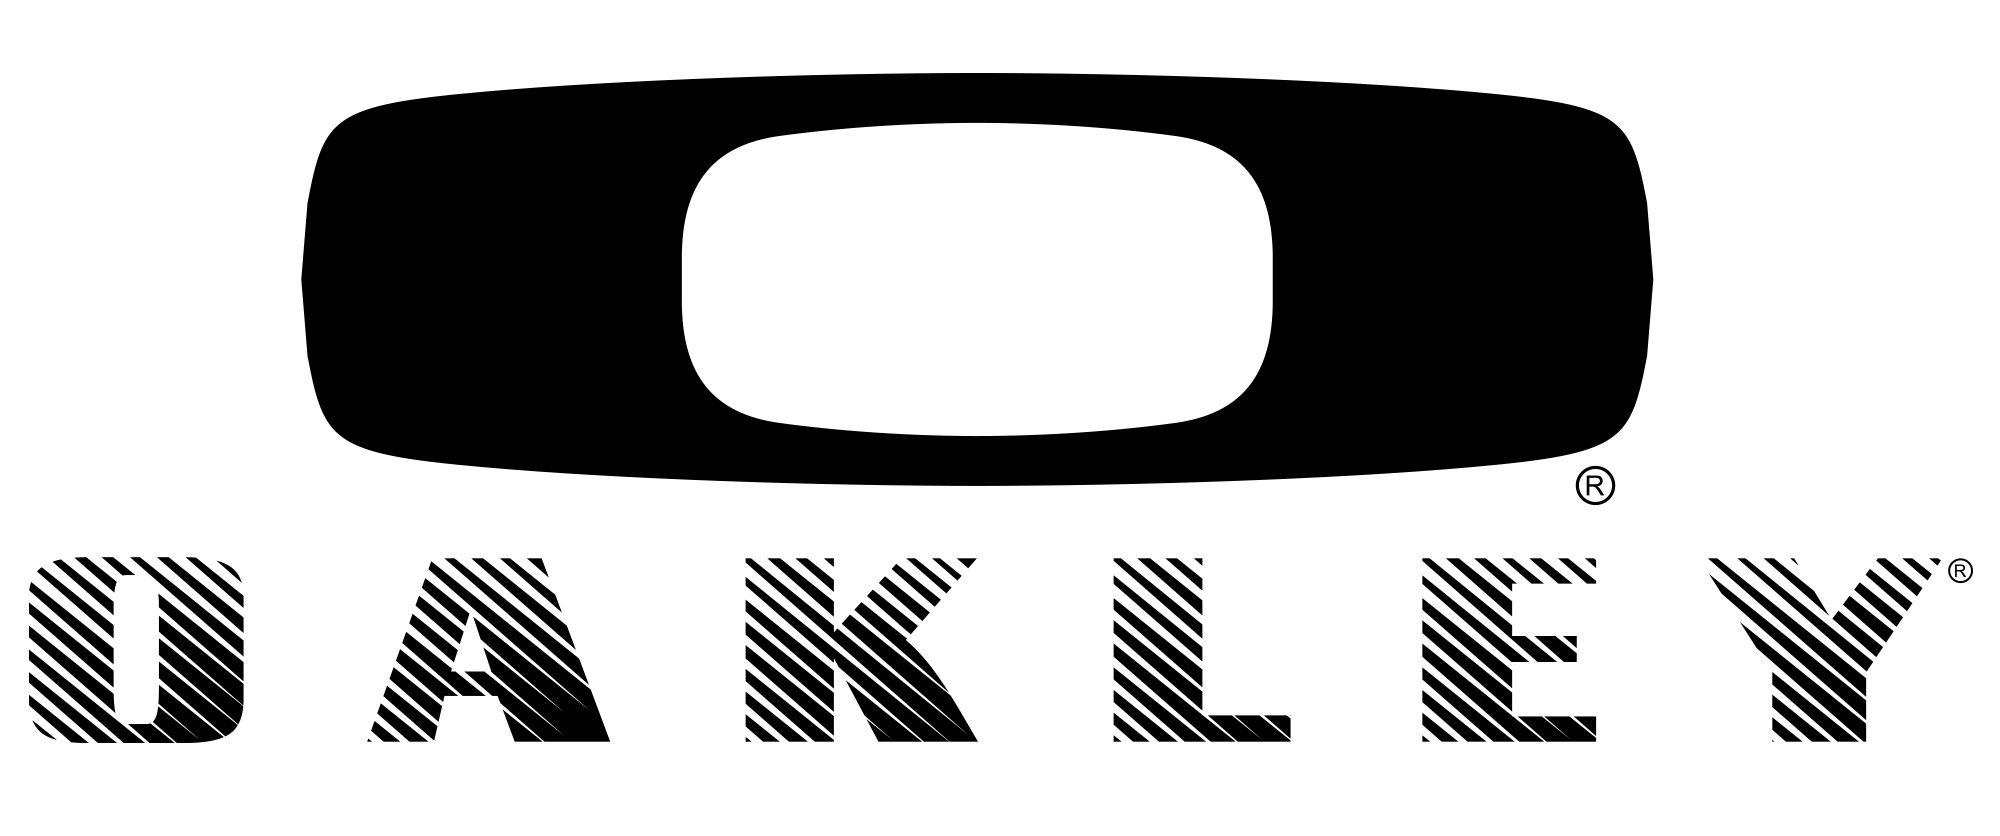 Oakly Logo - Meaning Oakley logo and symbol | history and evolution